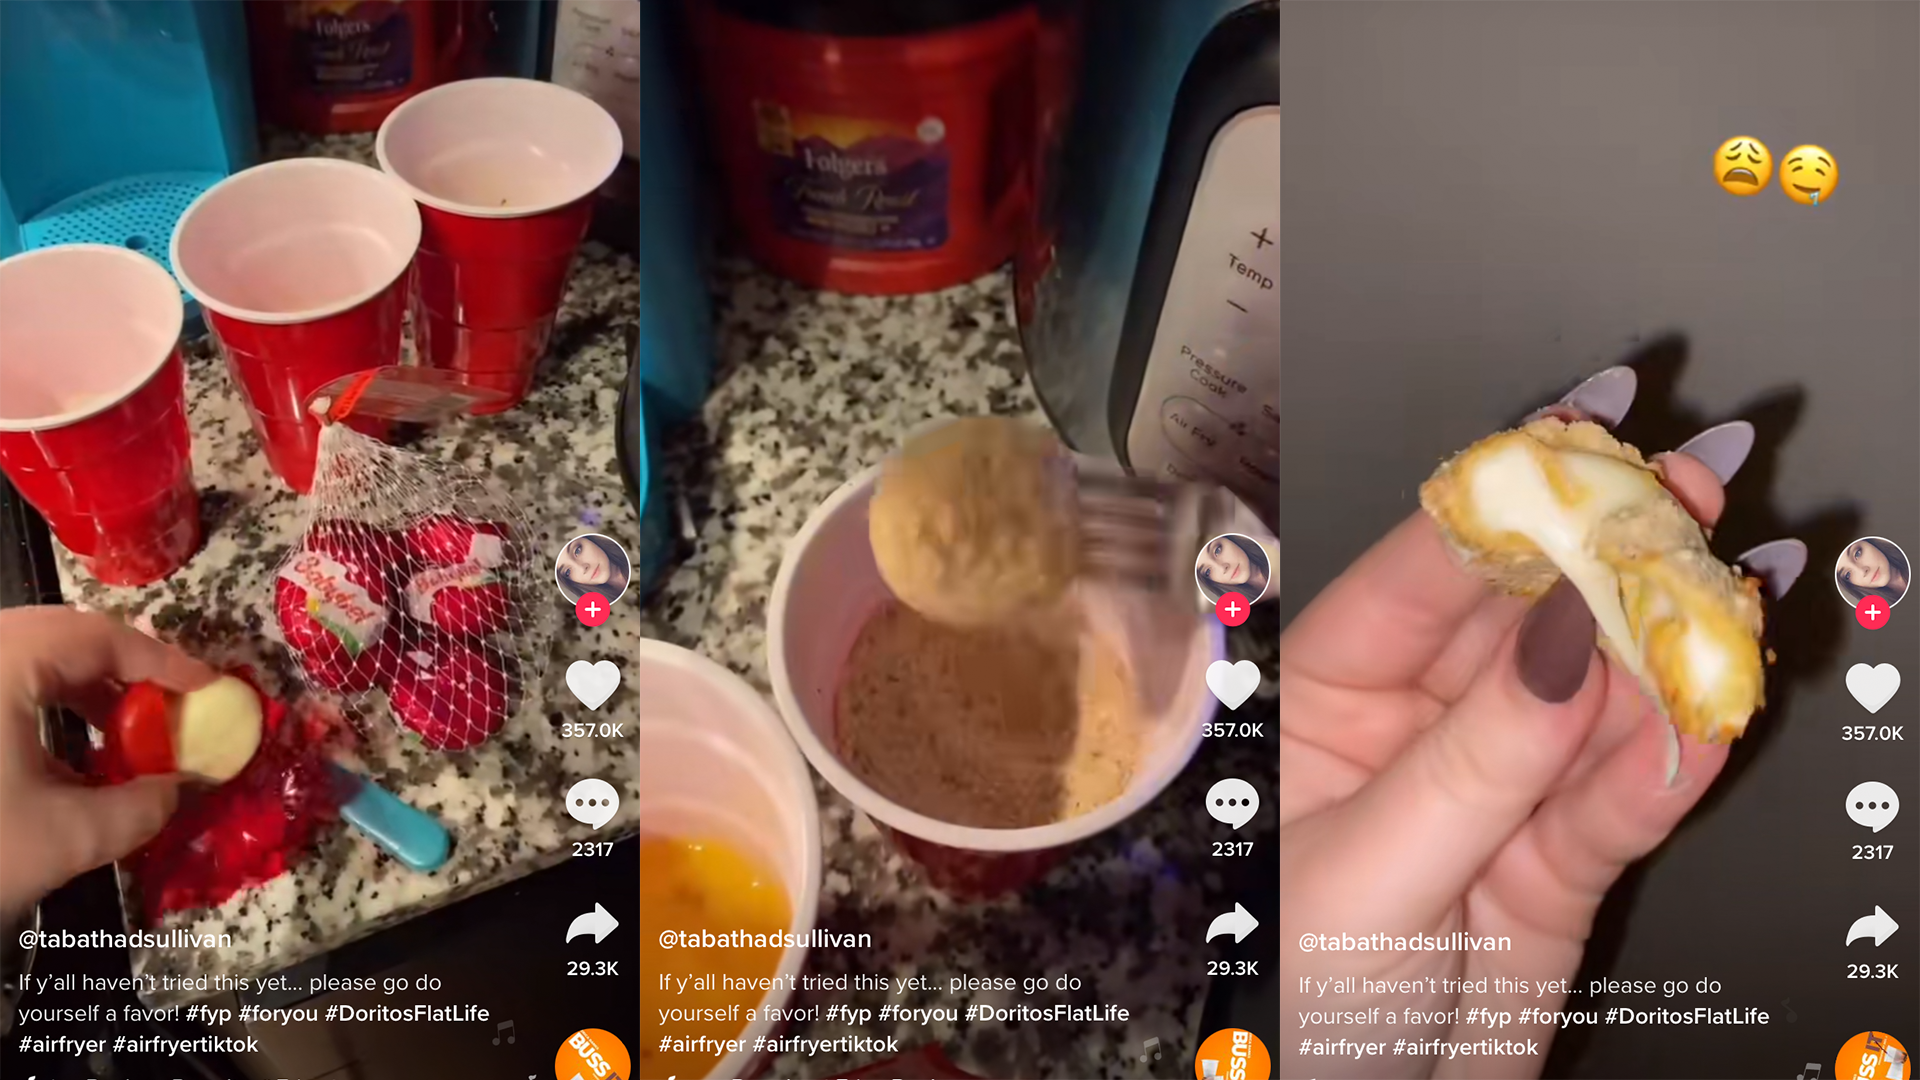 Here's how the viral TikTok of air fried babybell wheels looked.